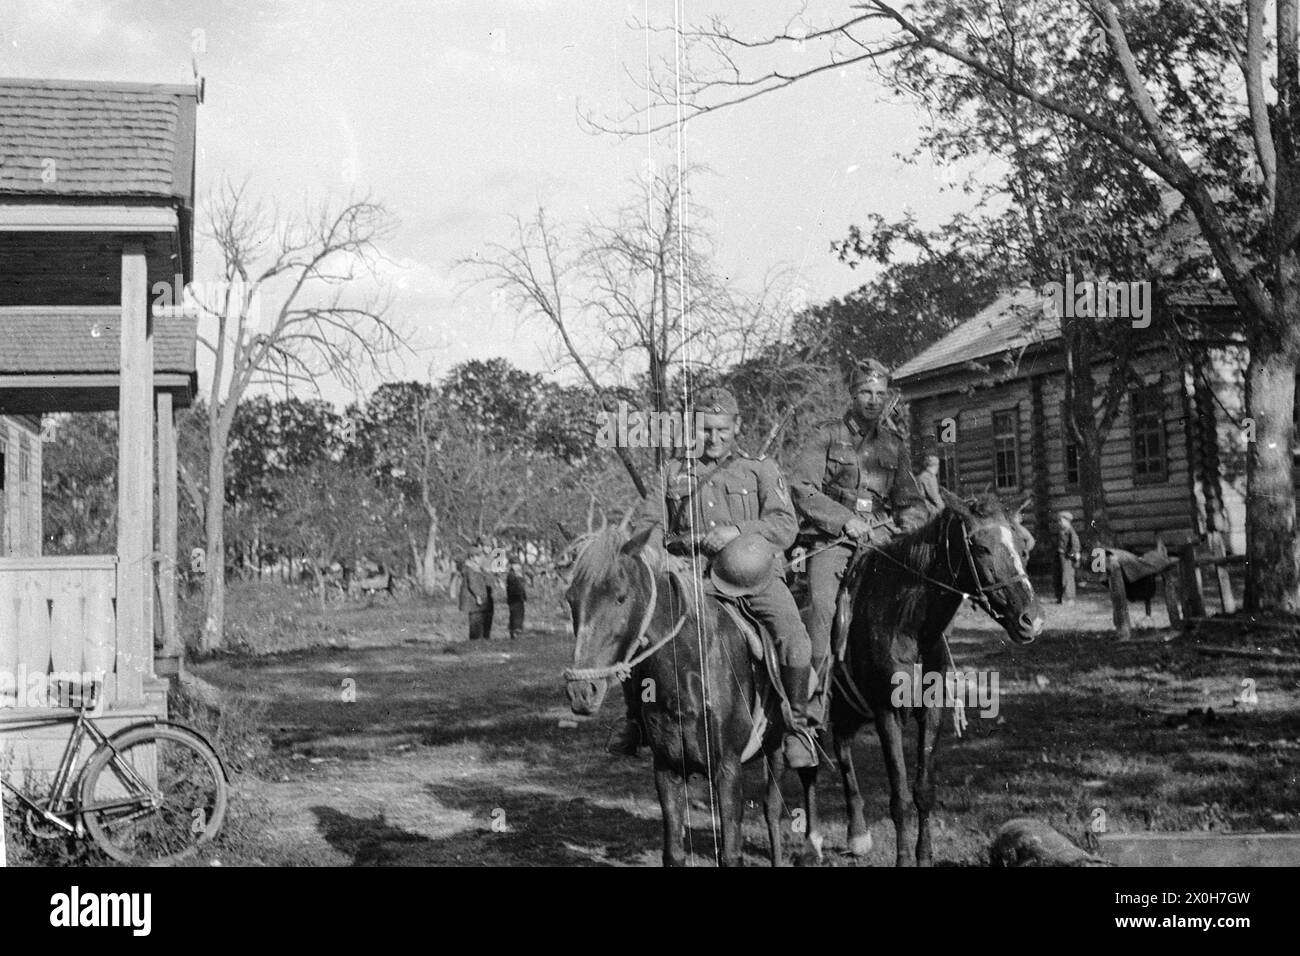 German soldiers ride horses in a village. Children are playing in the background. The picture was taken by a member of the Radfahrgrenadierregiment 2 / Radfahrsicherungsregiment 2, on the Eastern Front. [automated translation] Stock Photo